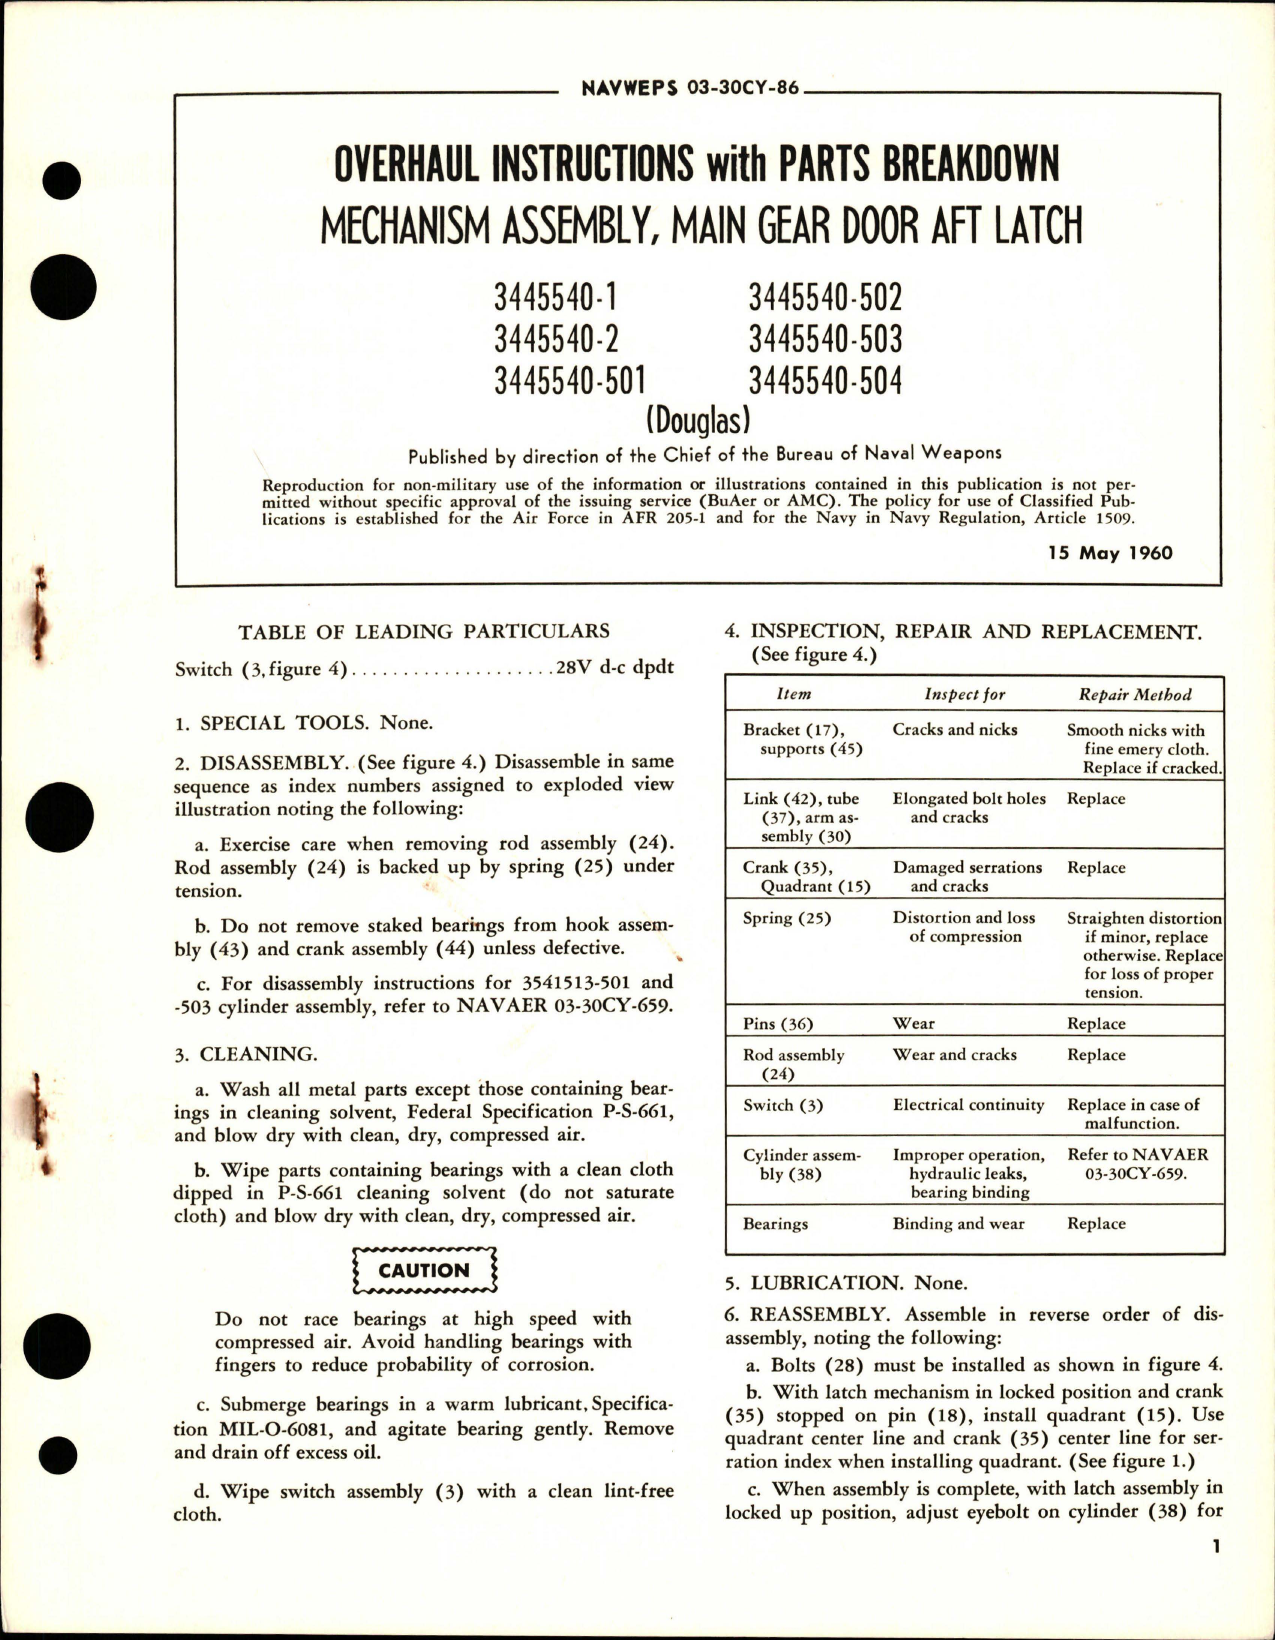 Sample page 1 from AirCorps Library document: Overhaul Instructions with Parts for Main Gear Door Aft Latch Mechanism Assembly